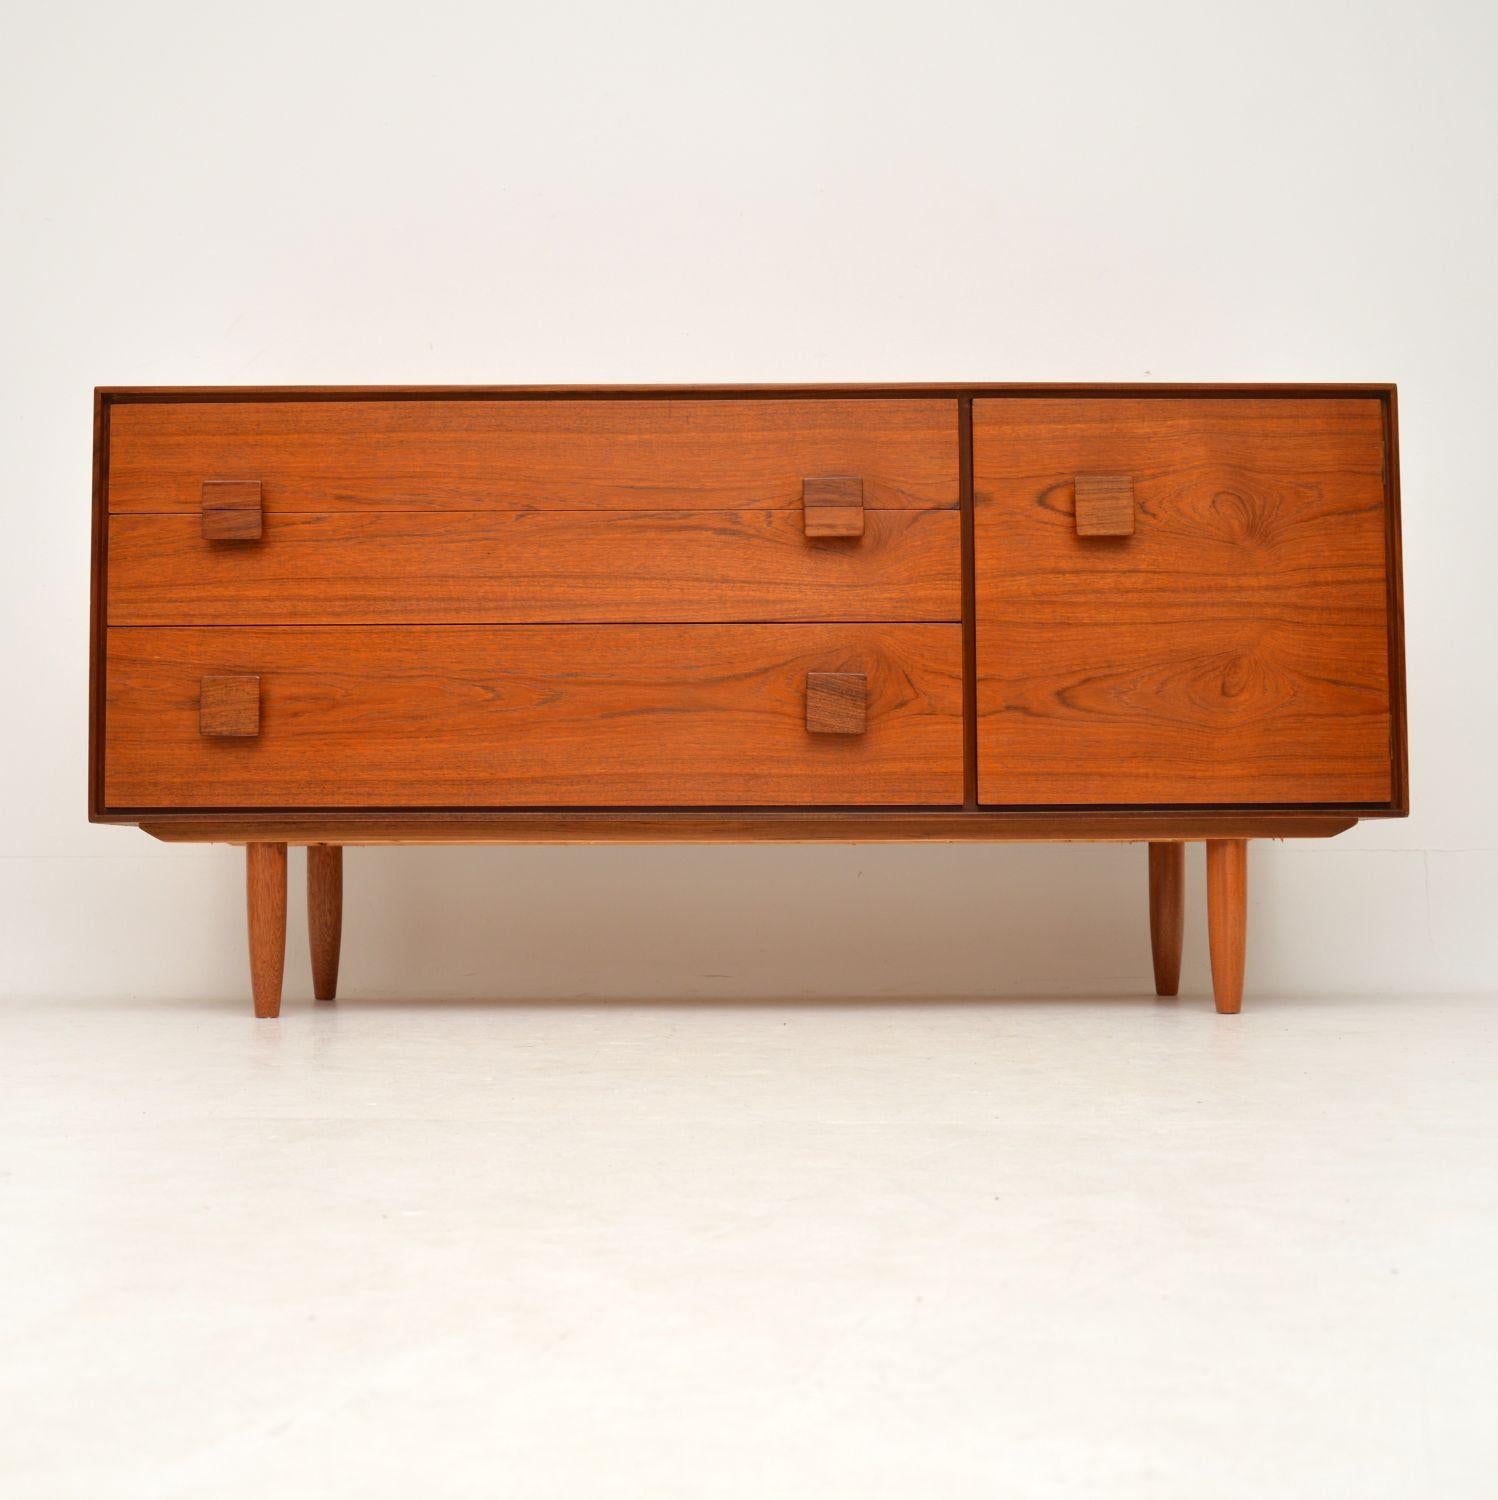 A stunning and very rare vintage teak sideboard, this was designed by the famous Danish designer IB Kofod Larsen for the G- Plan Danish range, it dates from the 1960s. It is a very useful size and is in superb condition, we have had this stripped